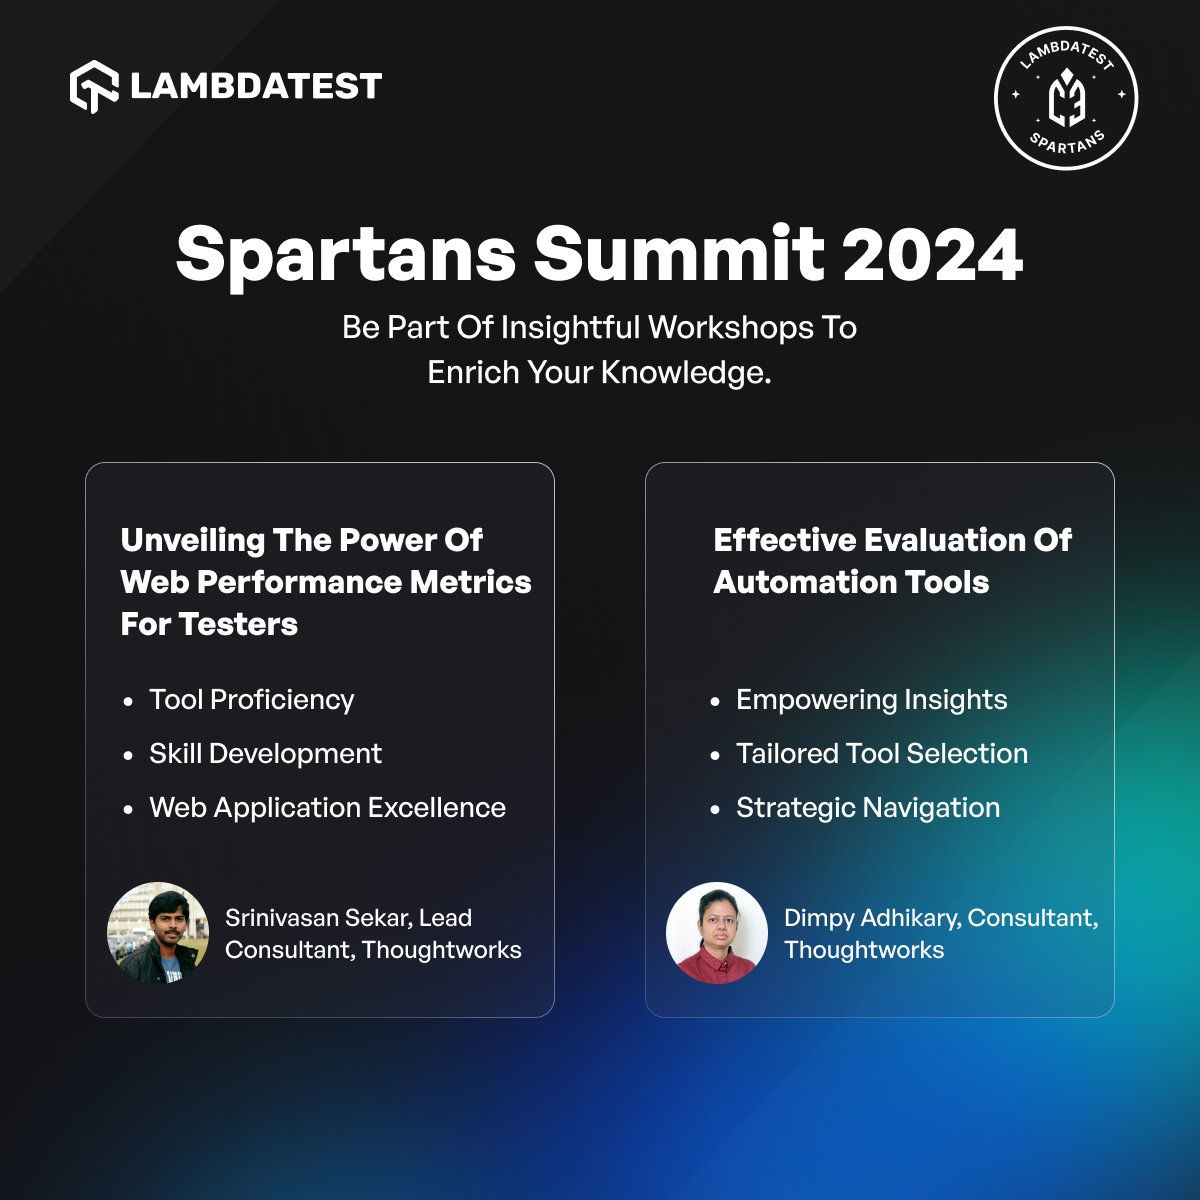 Seize the opportunity to transform your skills with our Spartans at Spartans Summit 2024!  🌍💻 Register now bit.ly/3O6usaG to immerse yourself in hands-on sessions led by industry experts like @srinivasanskr, Lead Consultant, and Dimpy Adhikary Consultant from